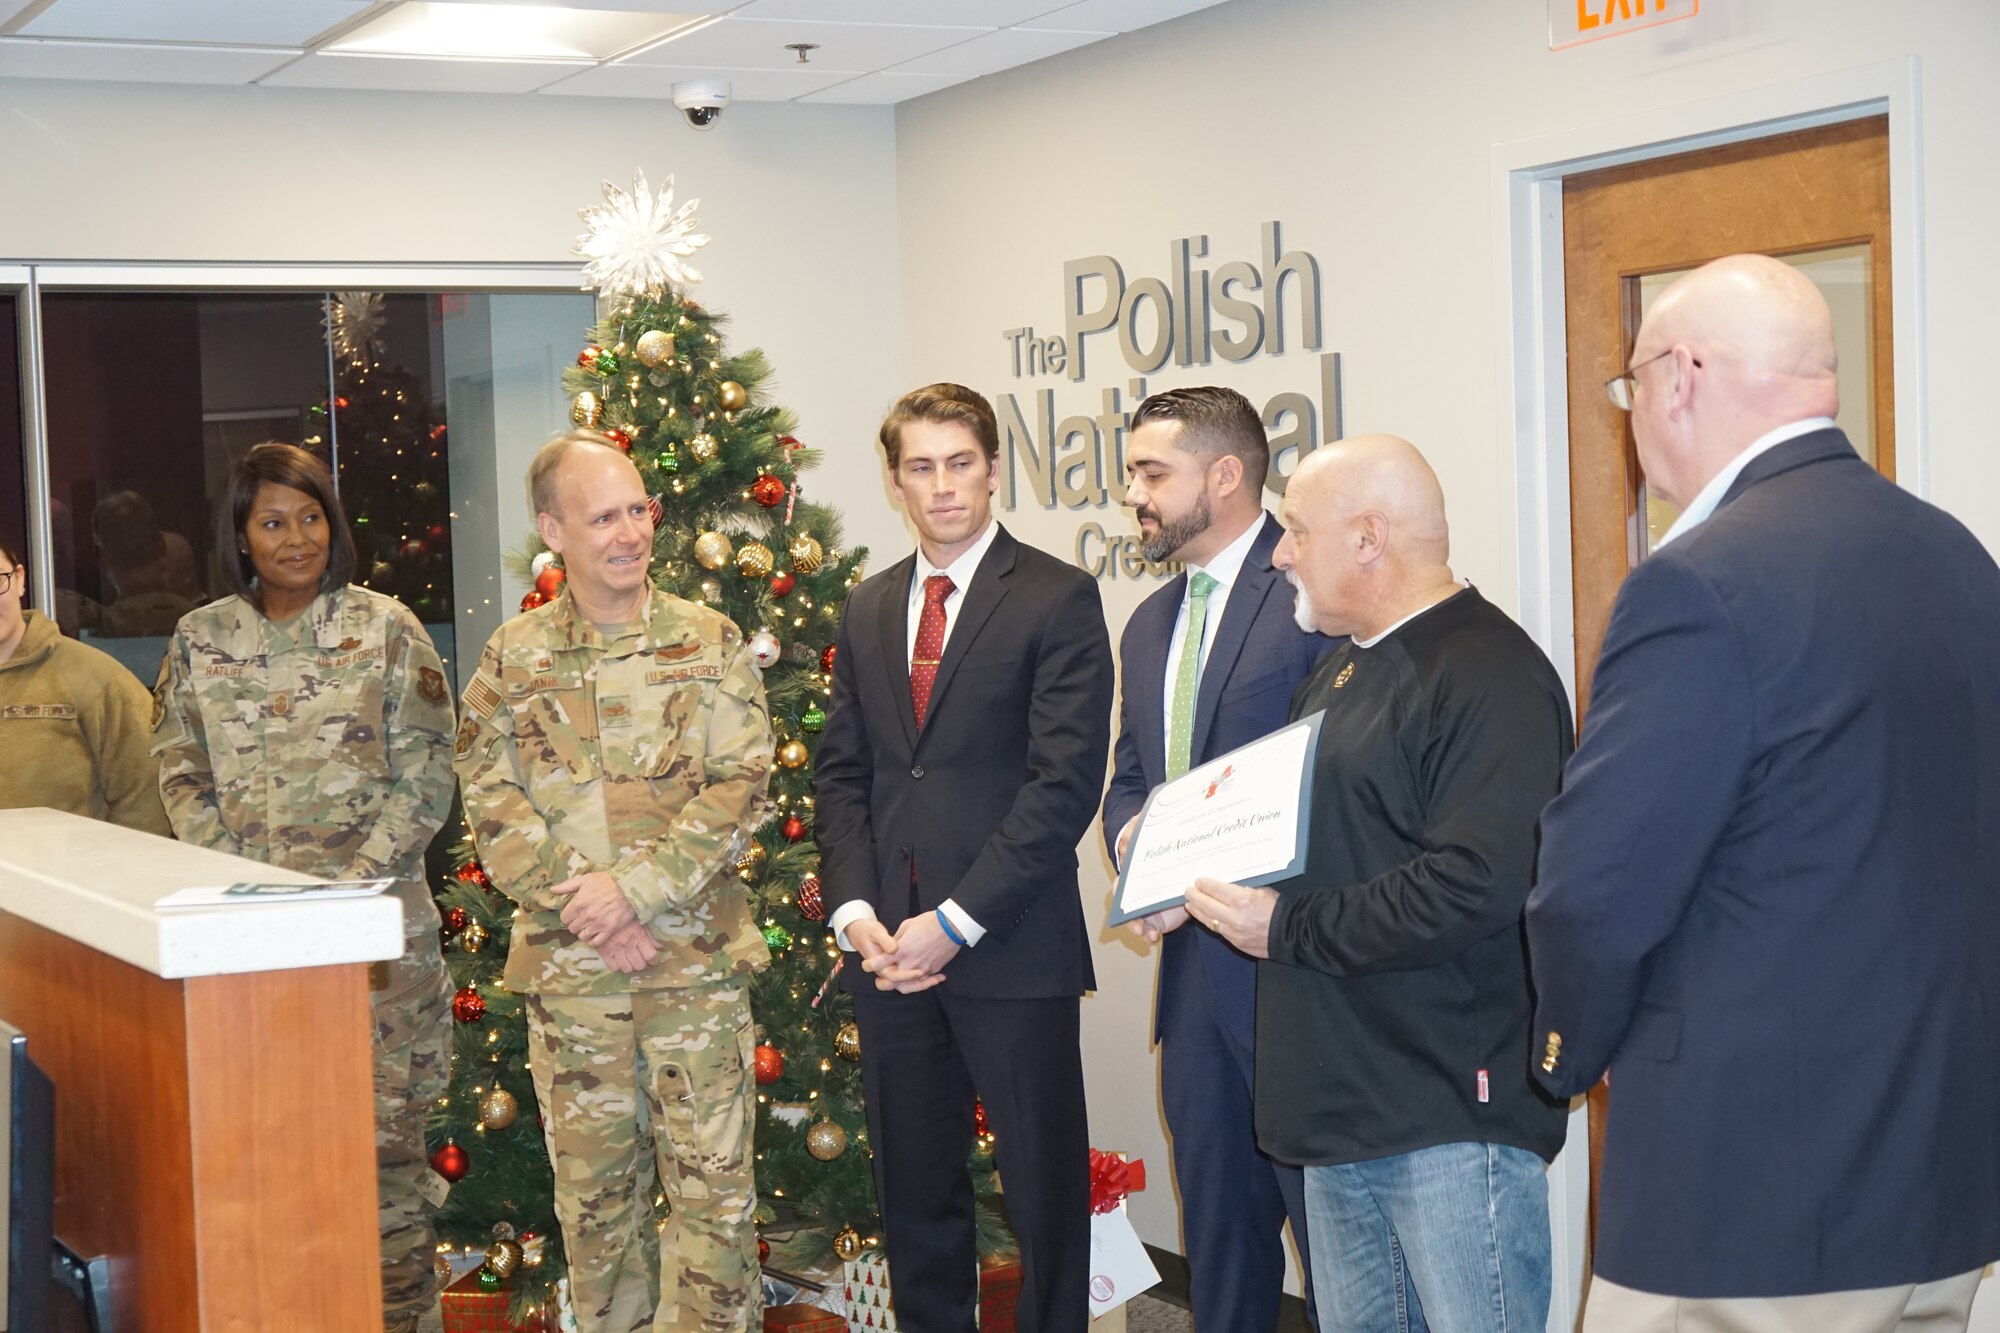 On Dec 21 Colonel Joseph Janik, 439 AW commander and Chief Master Sgt. Rosiline Ratliff, 439 AW command chief attended a recognition event at Polish National Credit Union.